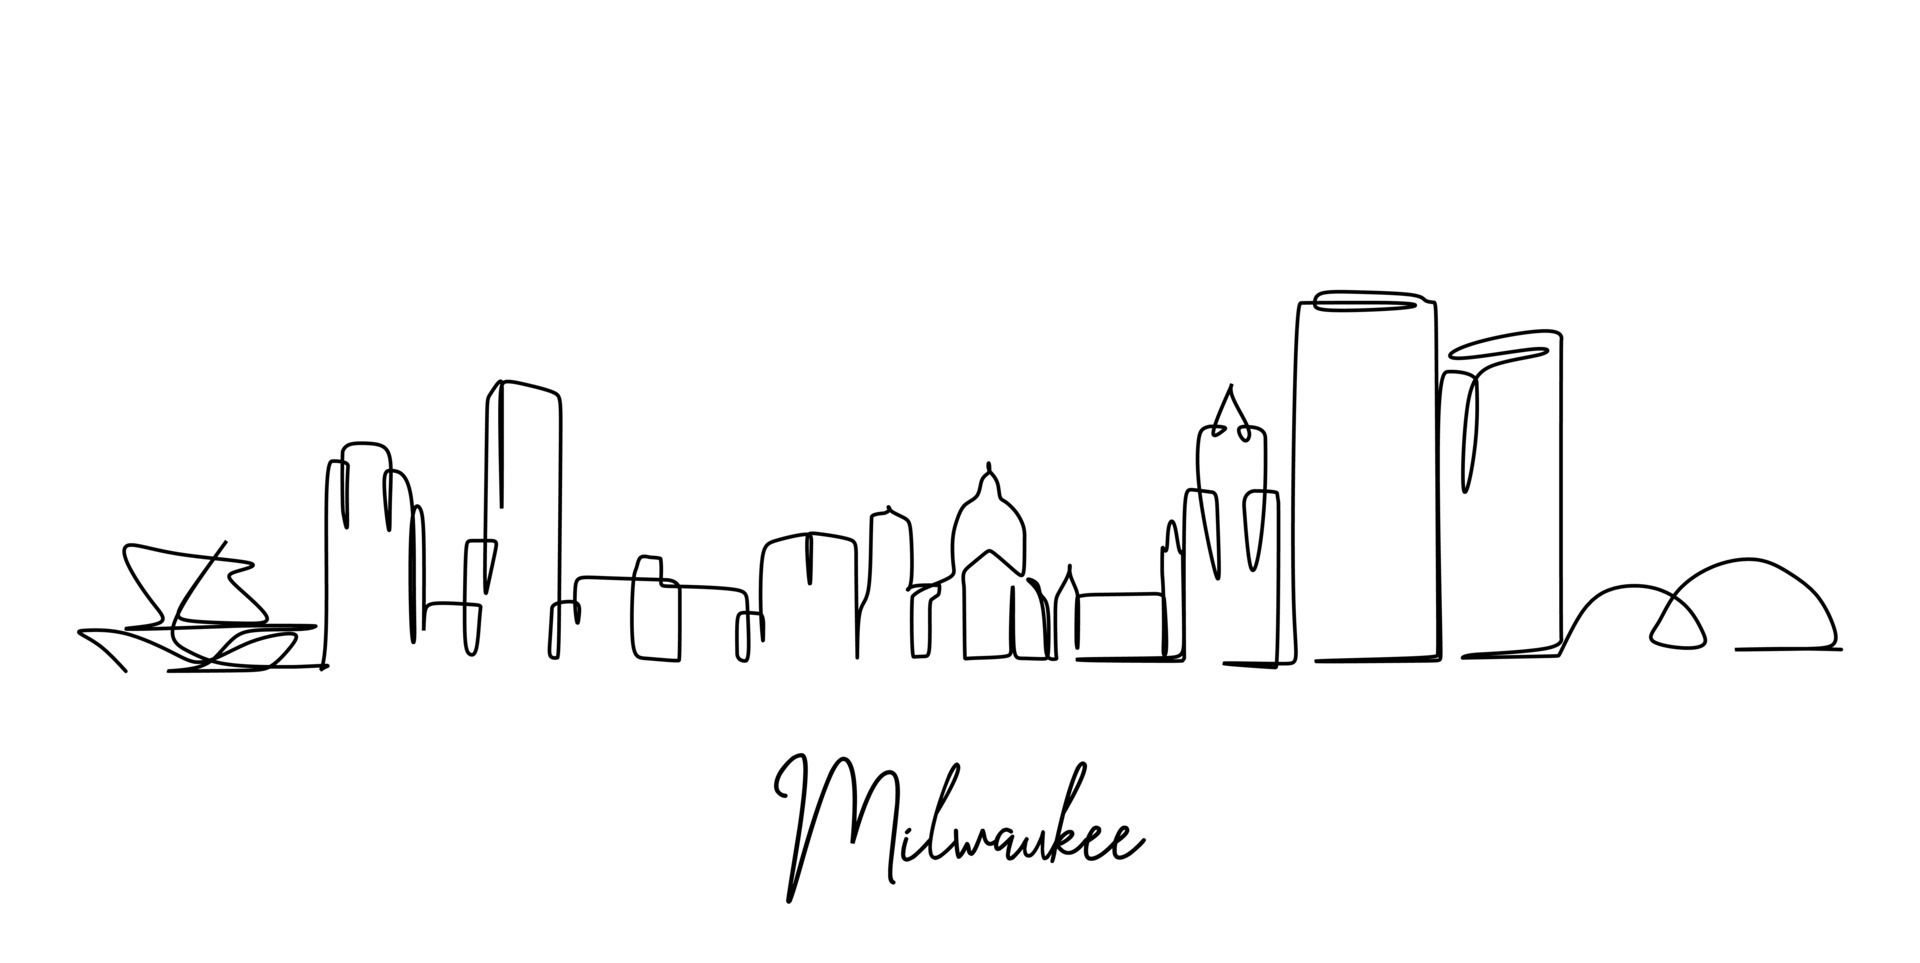 Premium Vector | Continuous line drawing of a city skyline and building  vector illustration premium vector